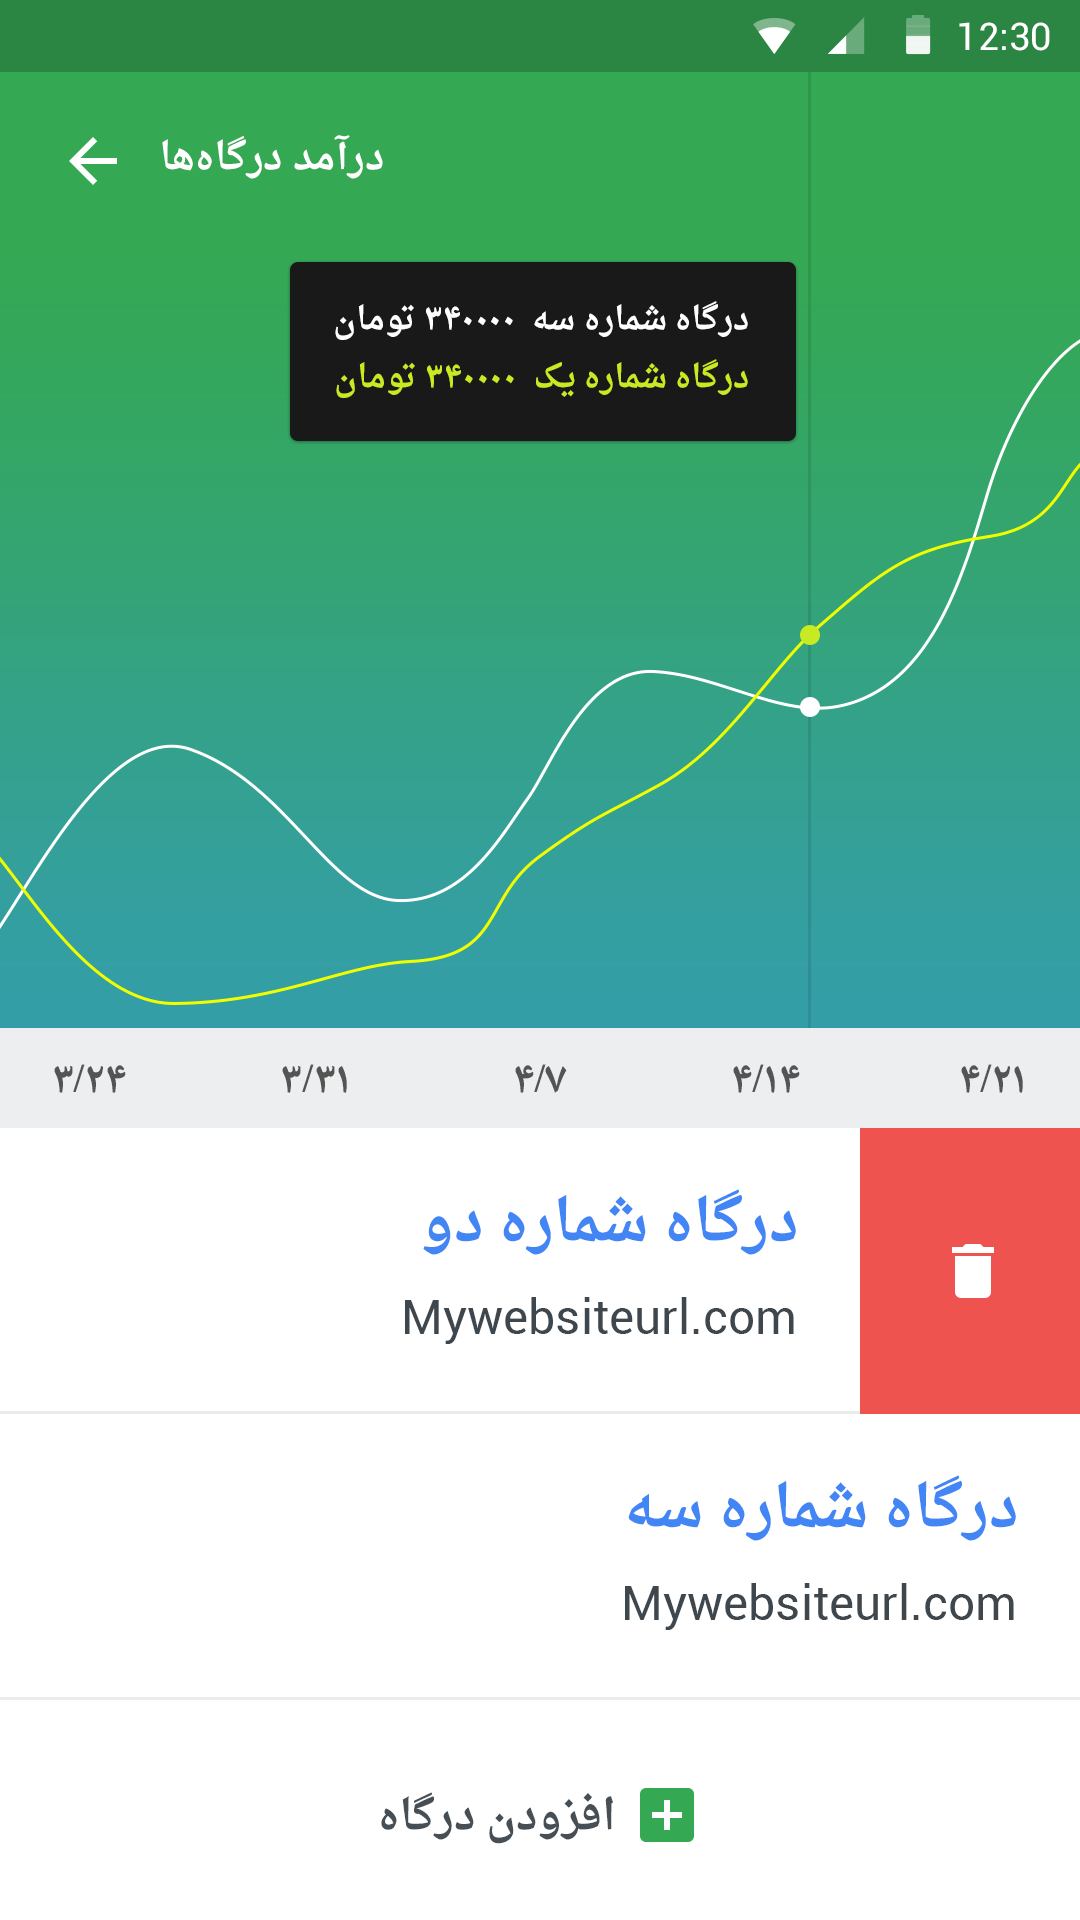 Upal for Android by Pouya Saadeghi - /projects/dmiJnpFG2vJskJZJOLb33eyZ3LPE6G4i.png